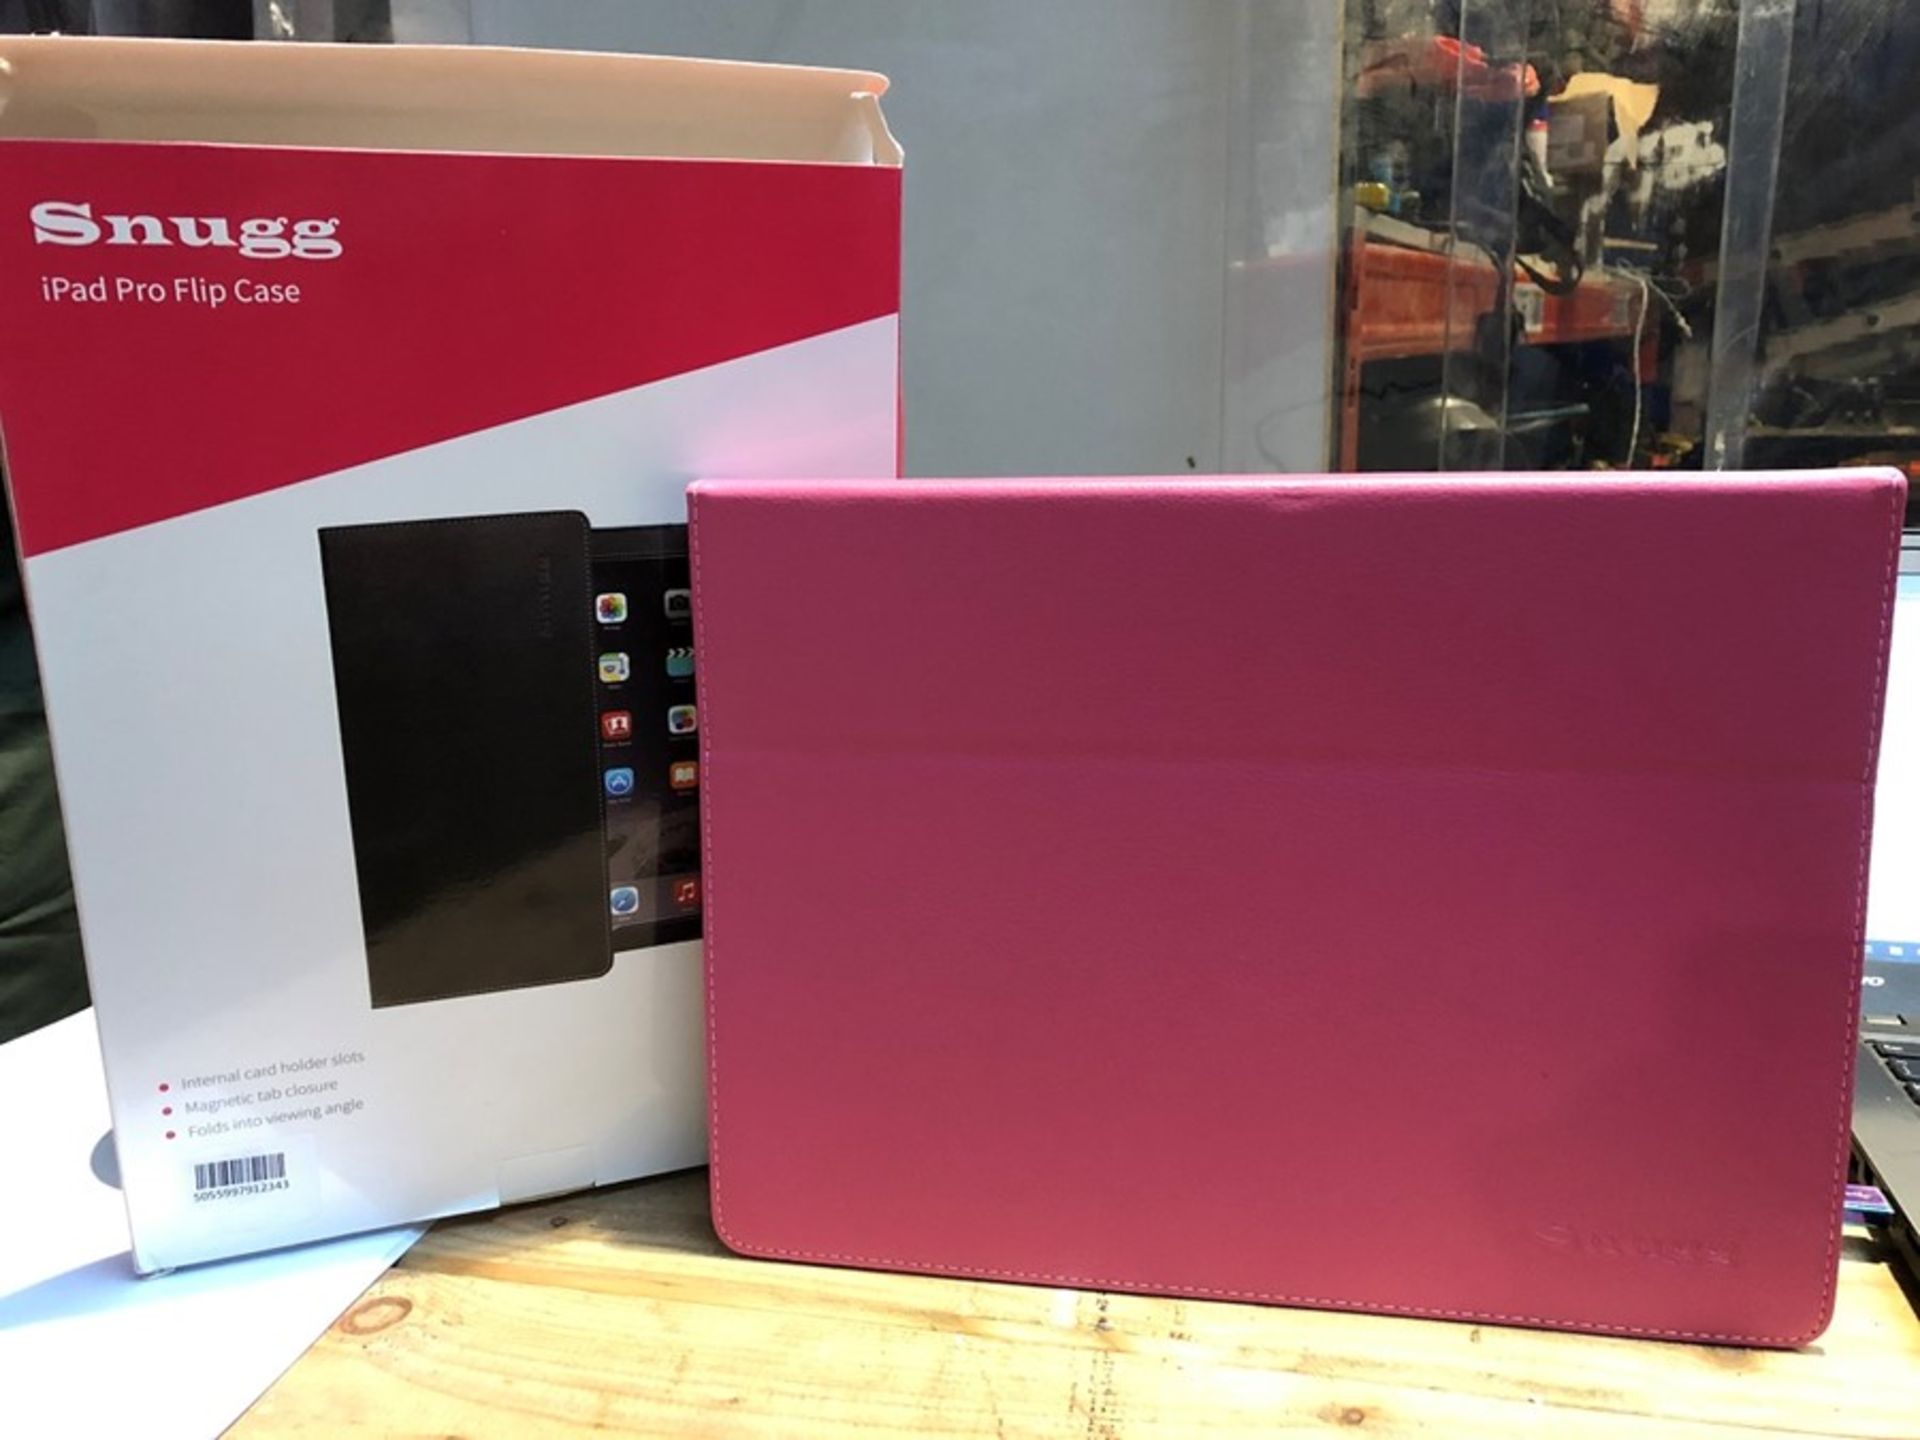 1 BOXED SNUGG IPAD PRO FLIP CASE 12.9 INCH IN PINK / RRP £24.99 (PUBLIC VIEWING AVAILABLE)